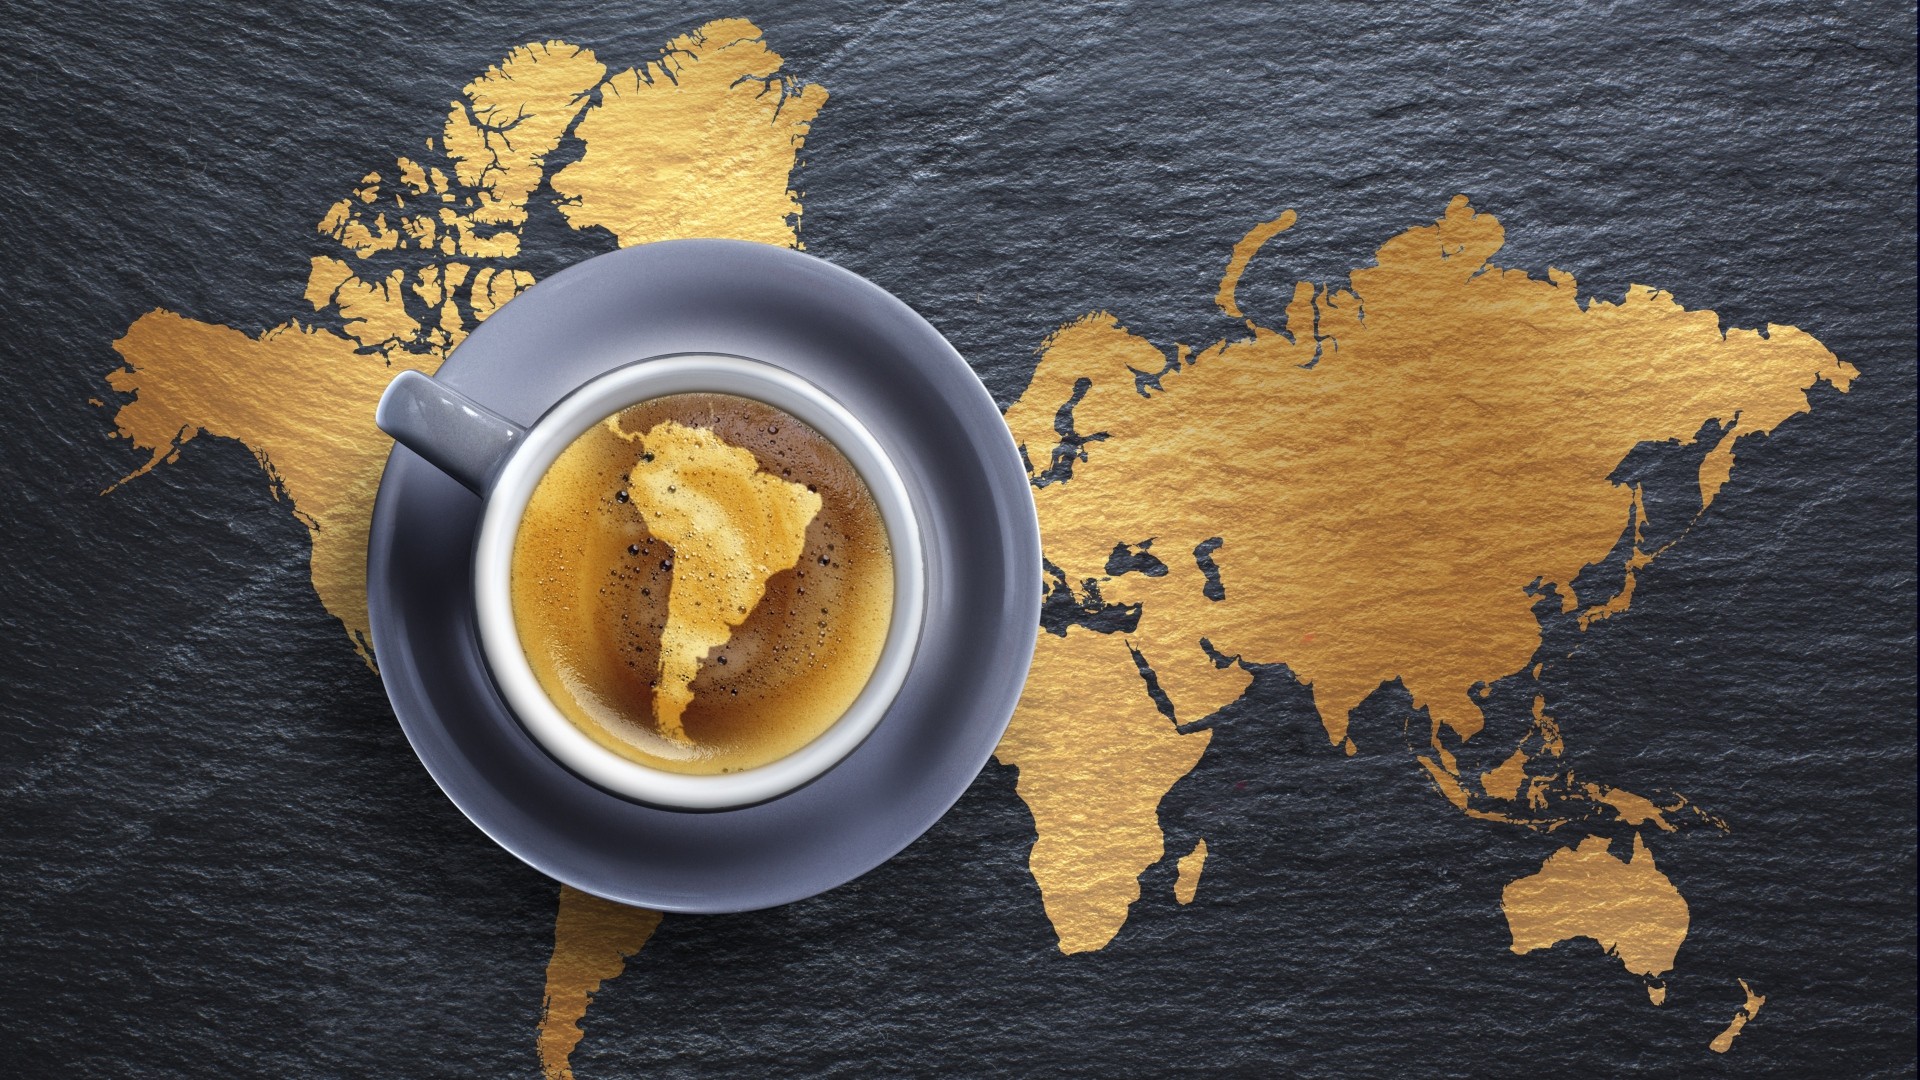 Coffee Map Continents Photo Manipulation South America Earth Brazil Wood 1920x1080